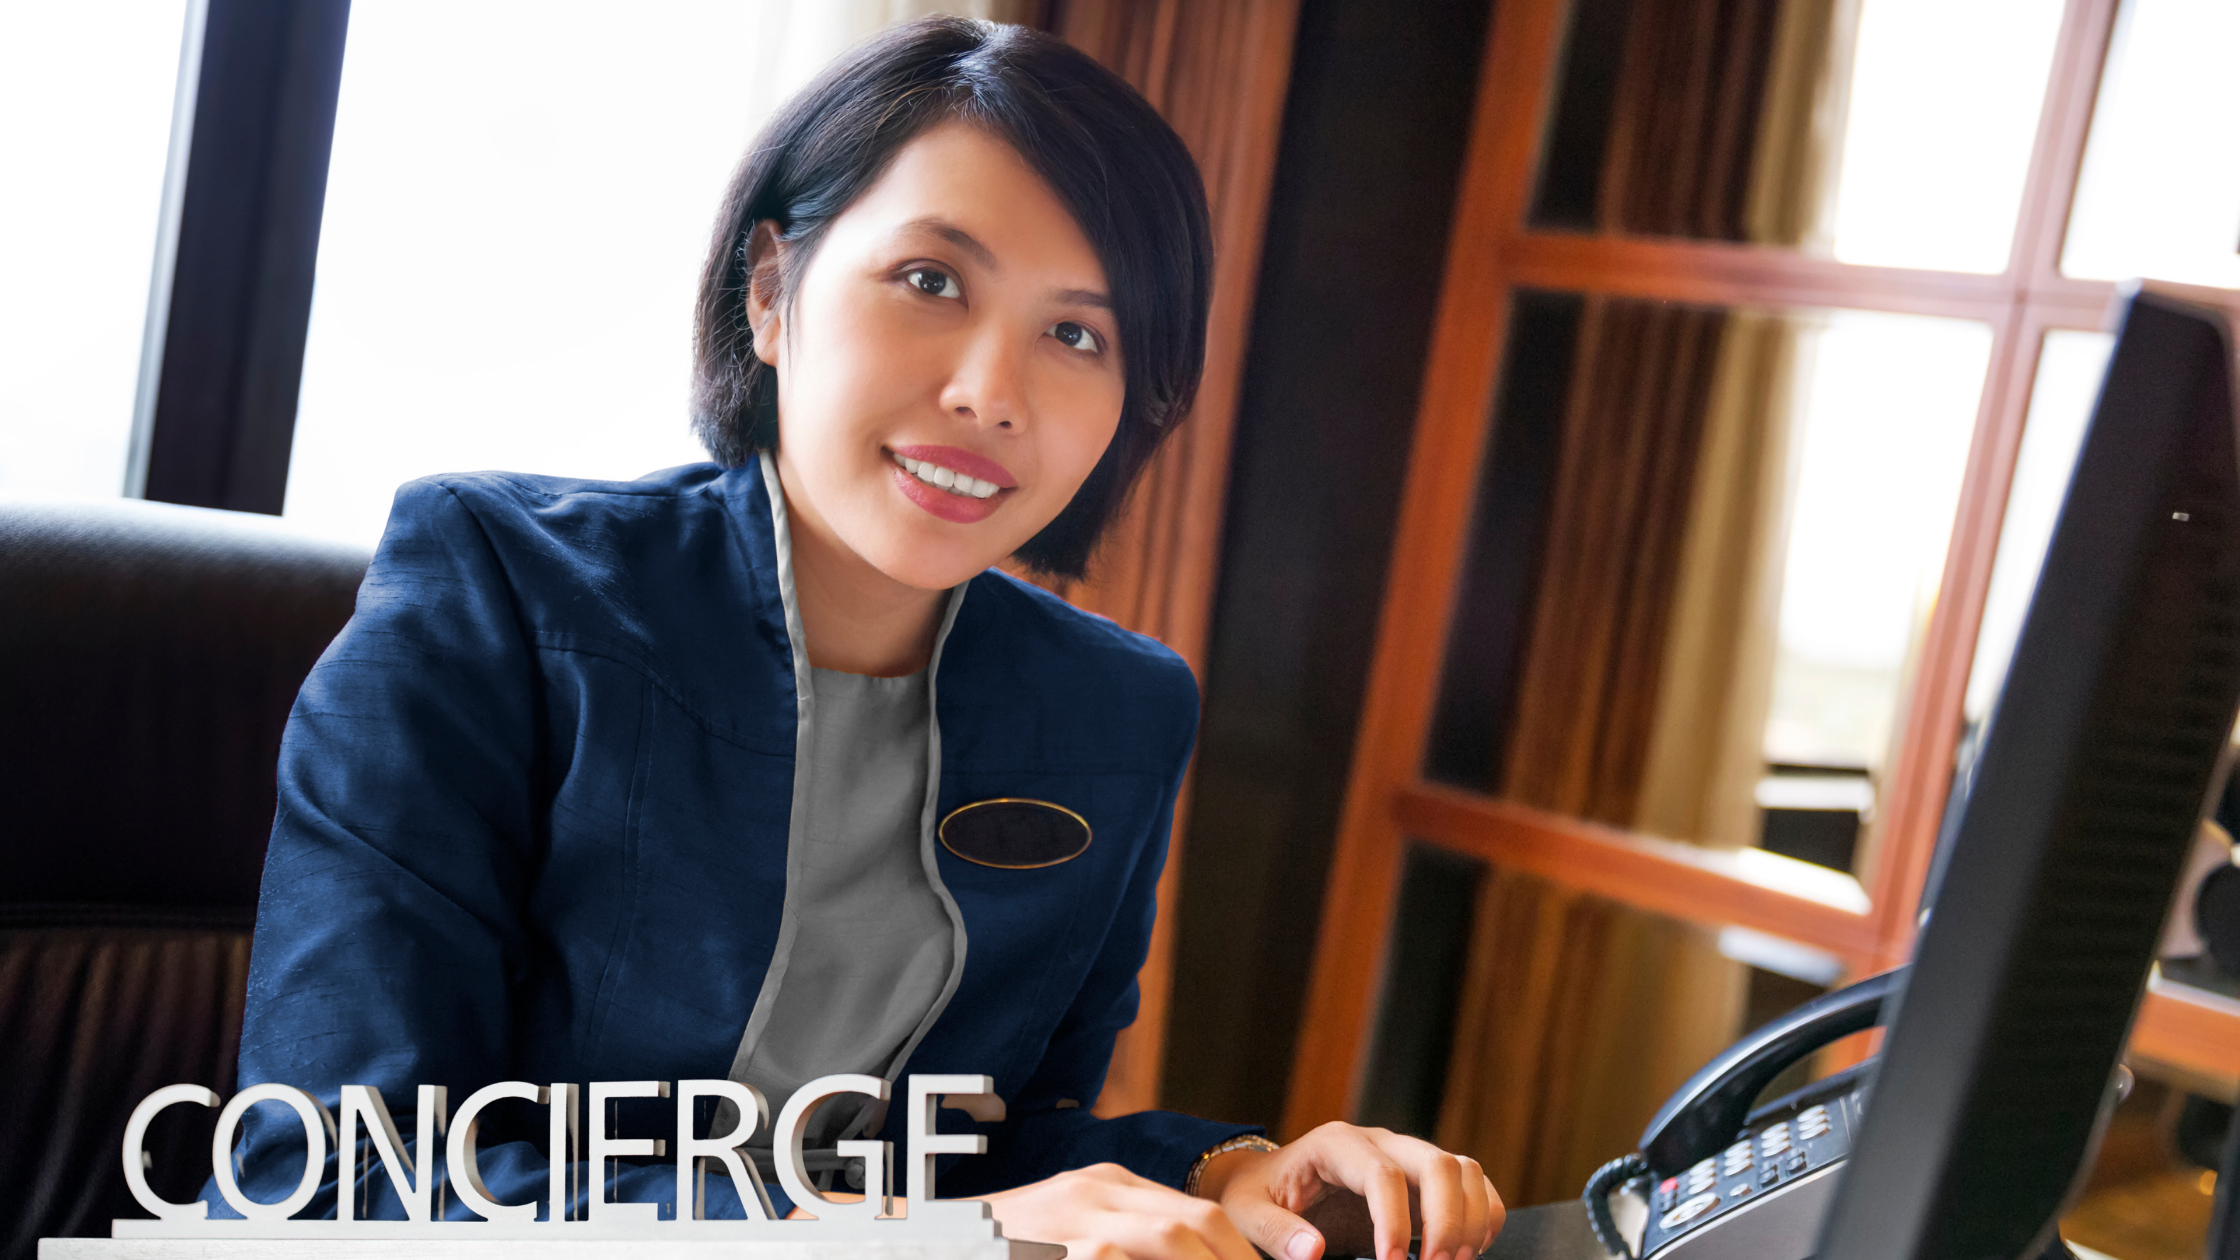 Concierge desk – a new luxury norm in your apartment